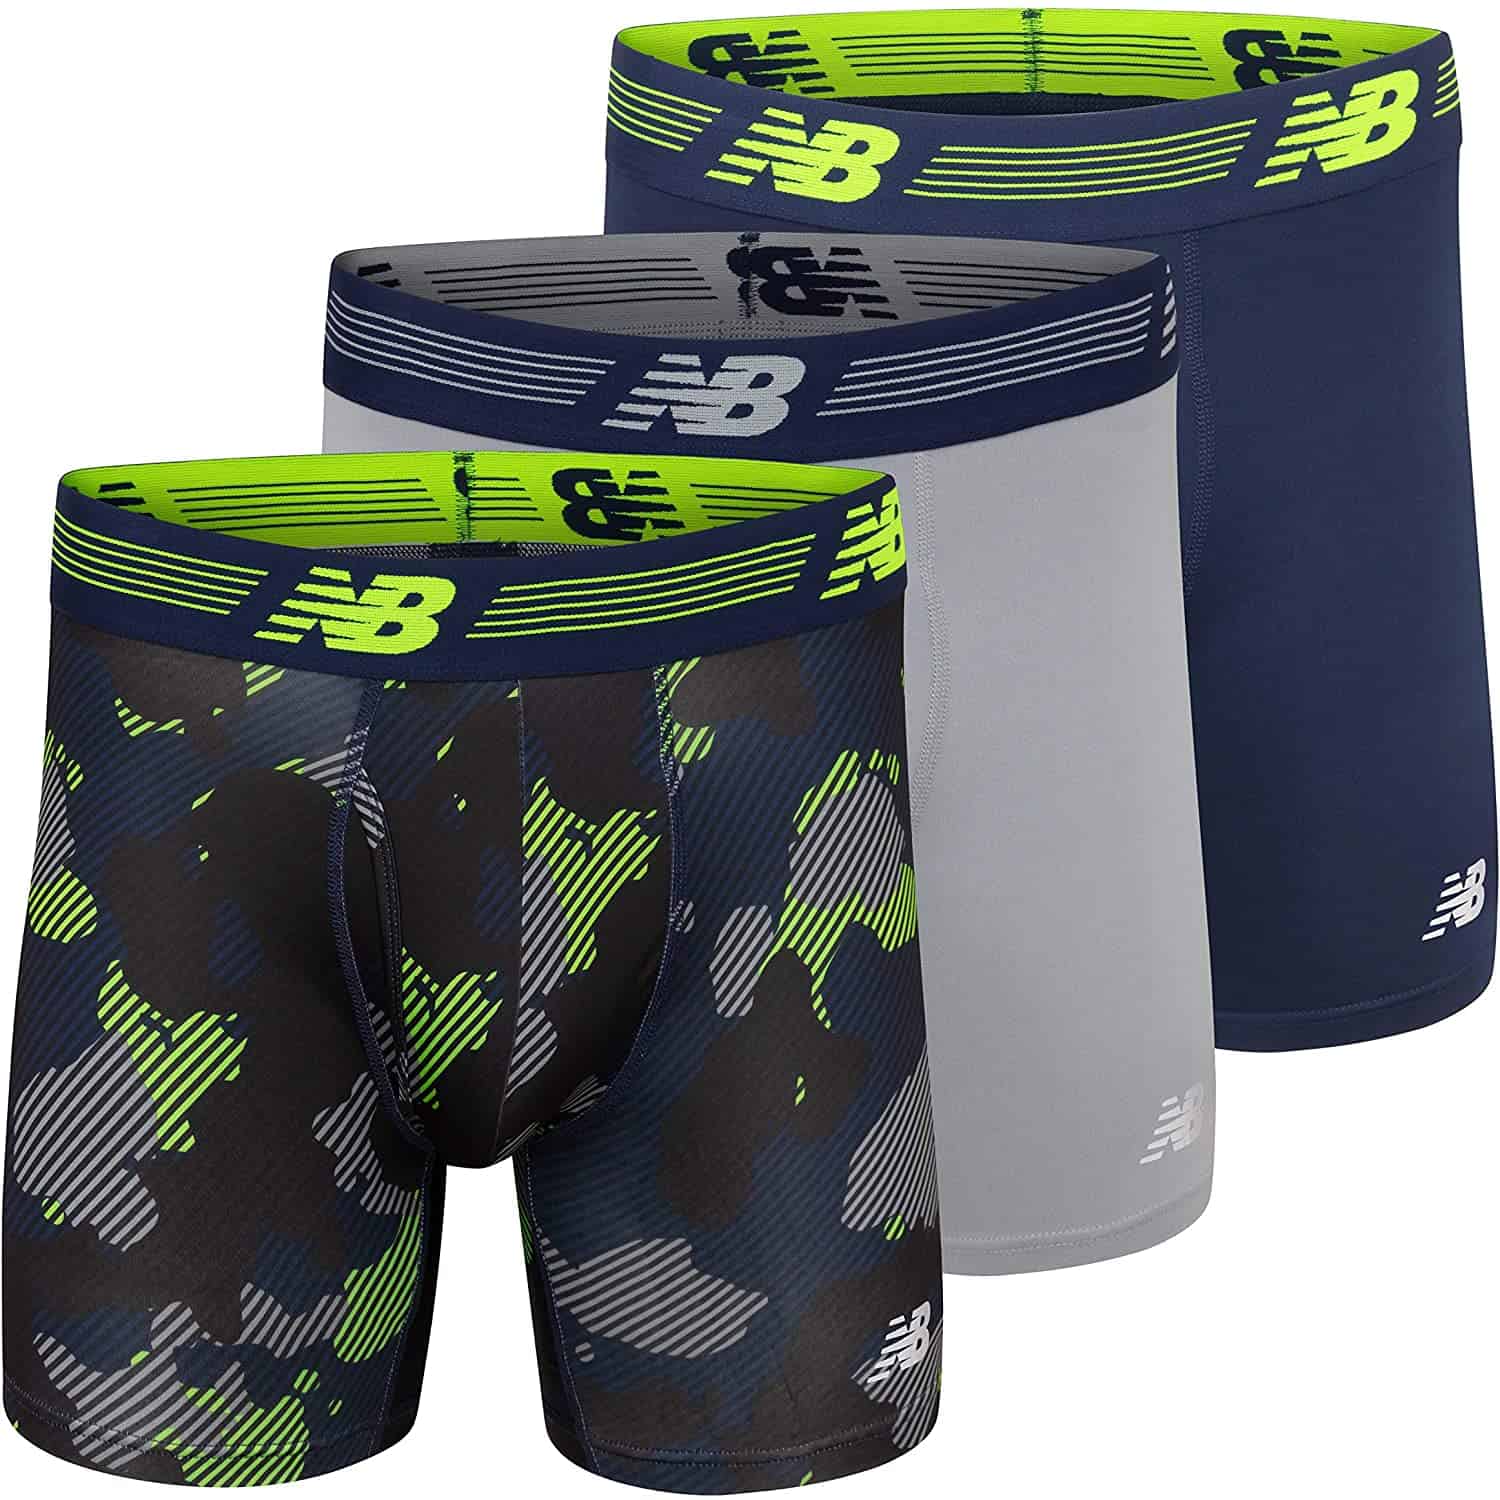 5 PACK NEW Balance Mens Cotton Durable Fade Resistant Trunks Boxer